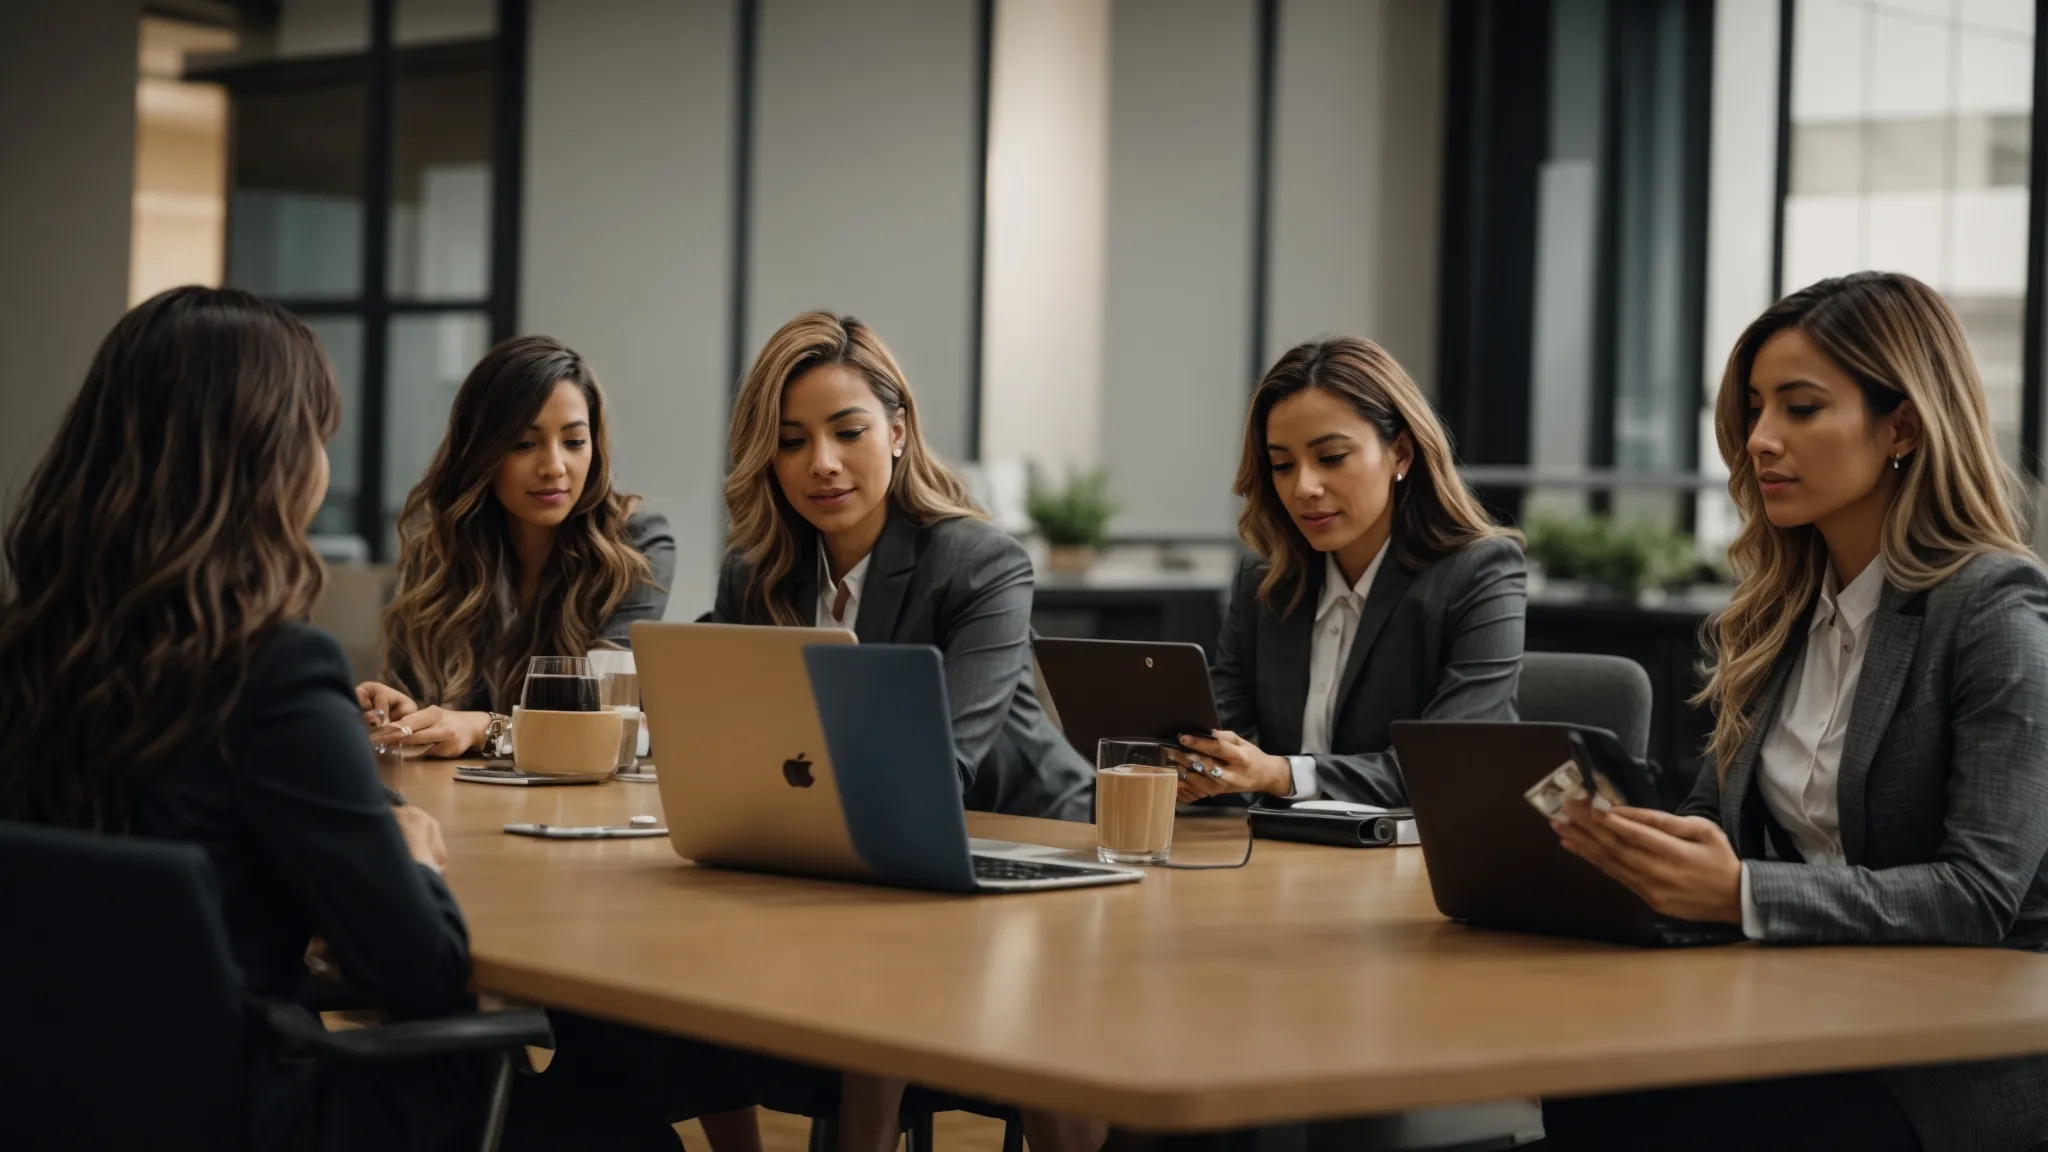 a group of professional women engage in a lively discussion around a conference table with laptops and digital devices.